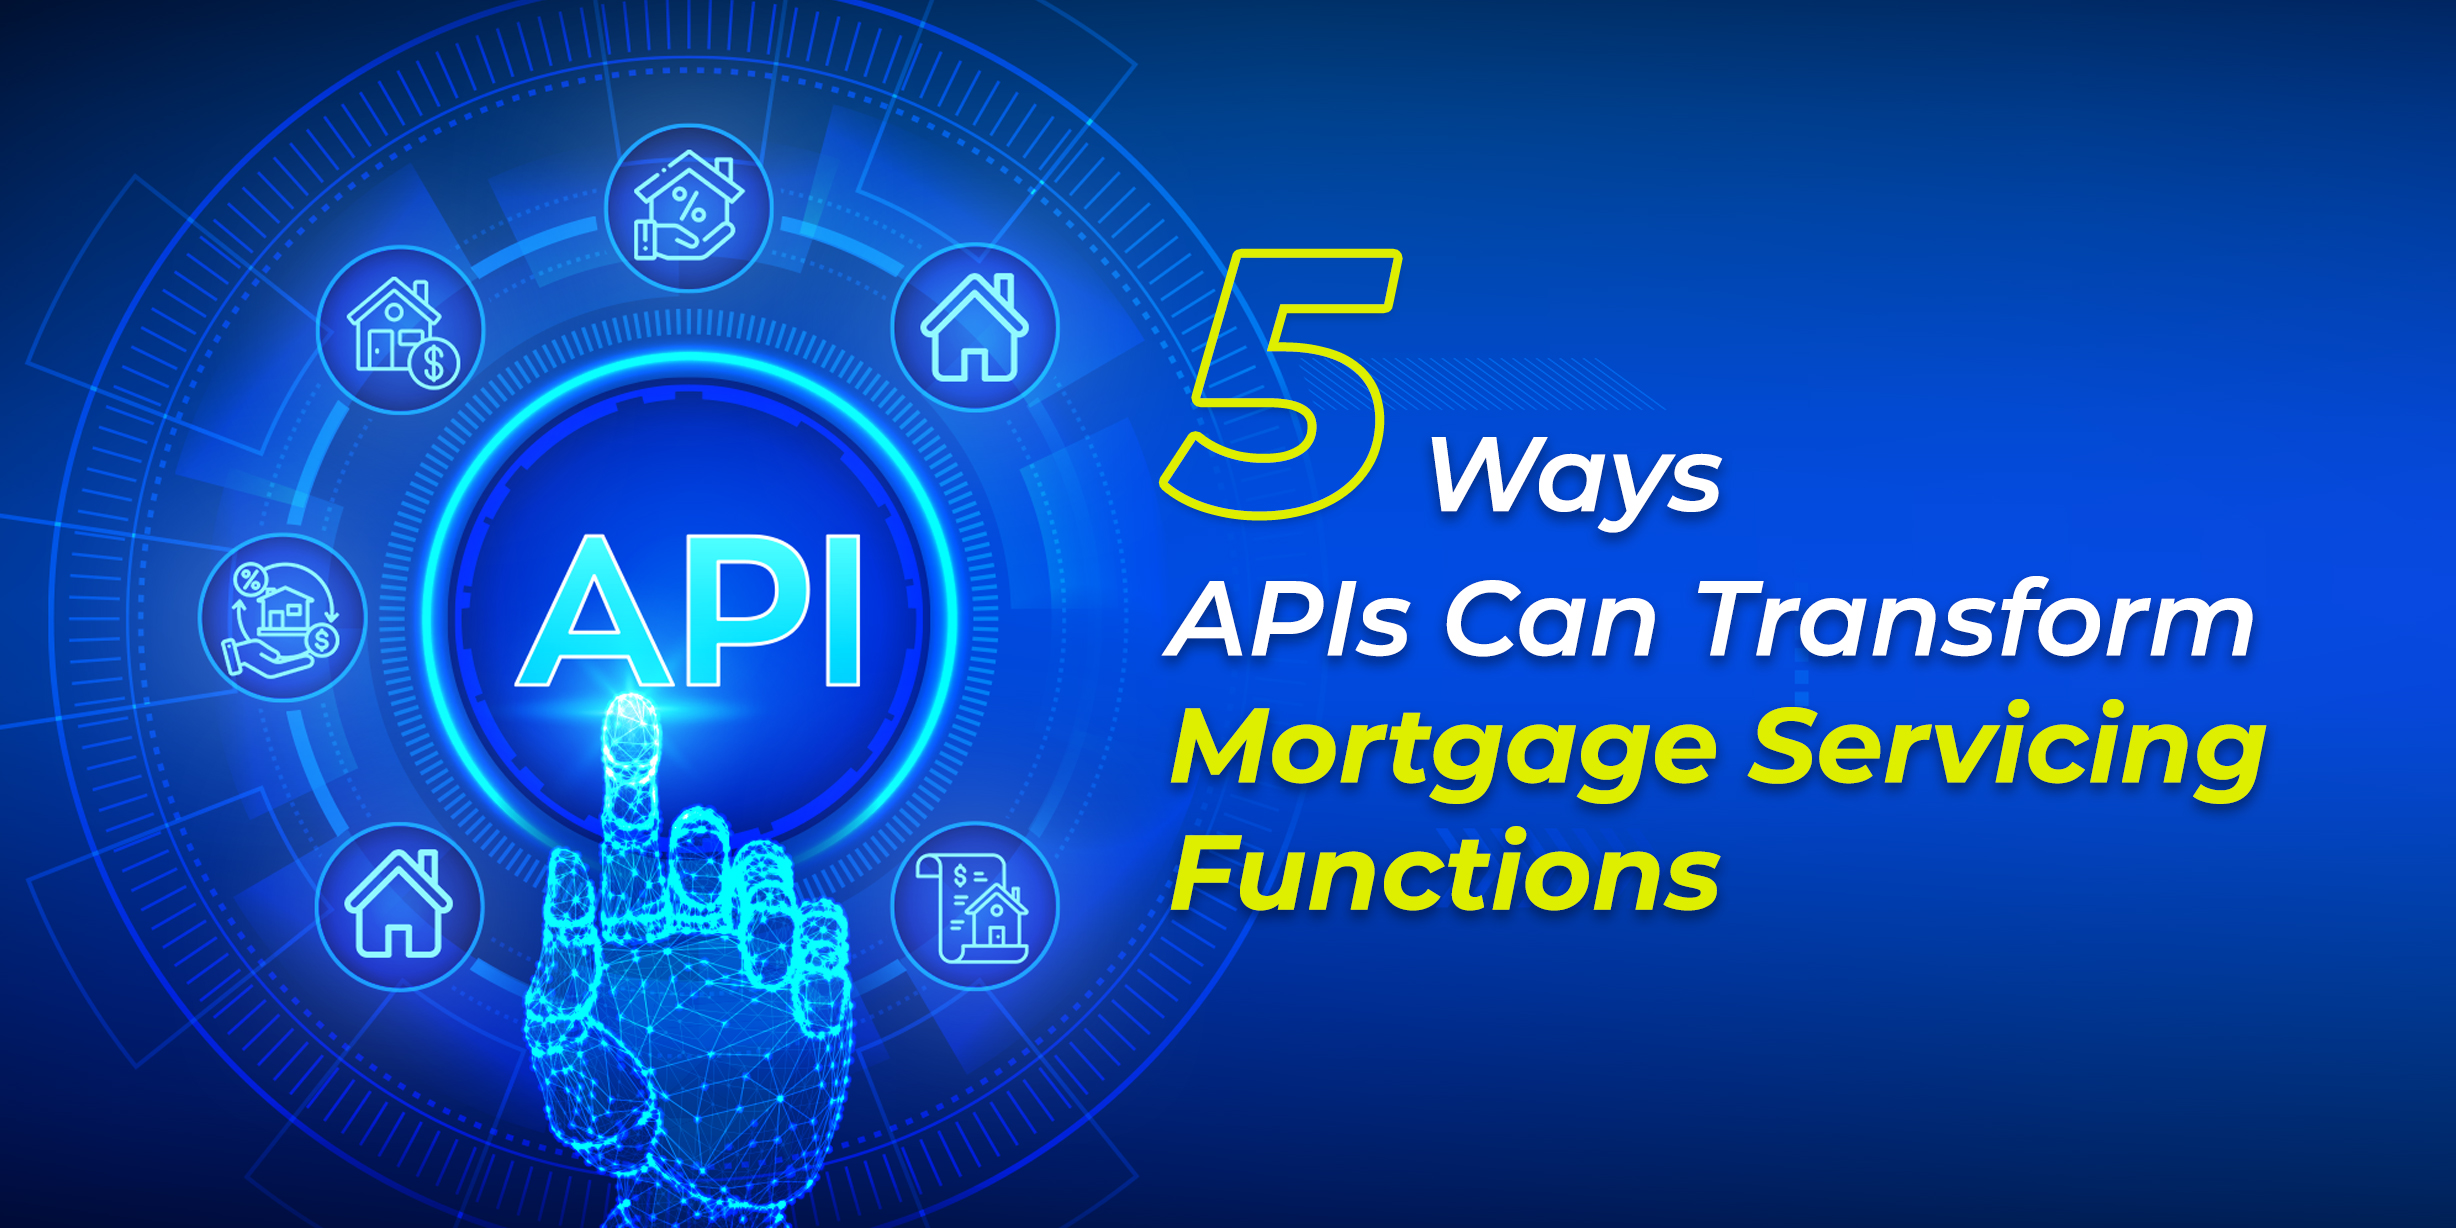 5 Ways APIs Can Transform Mortgage Servicing Functions